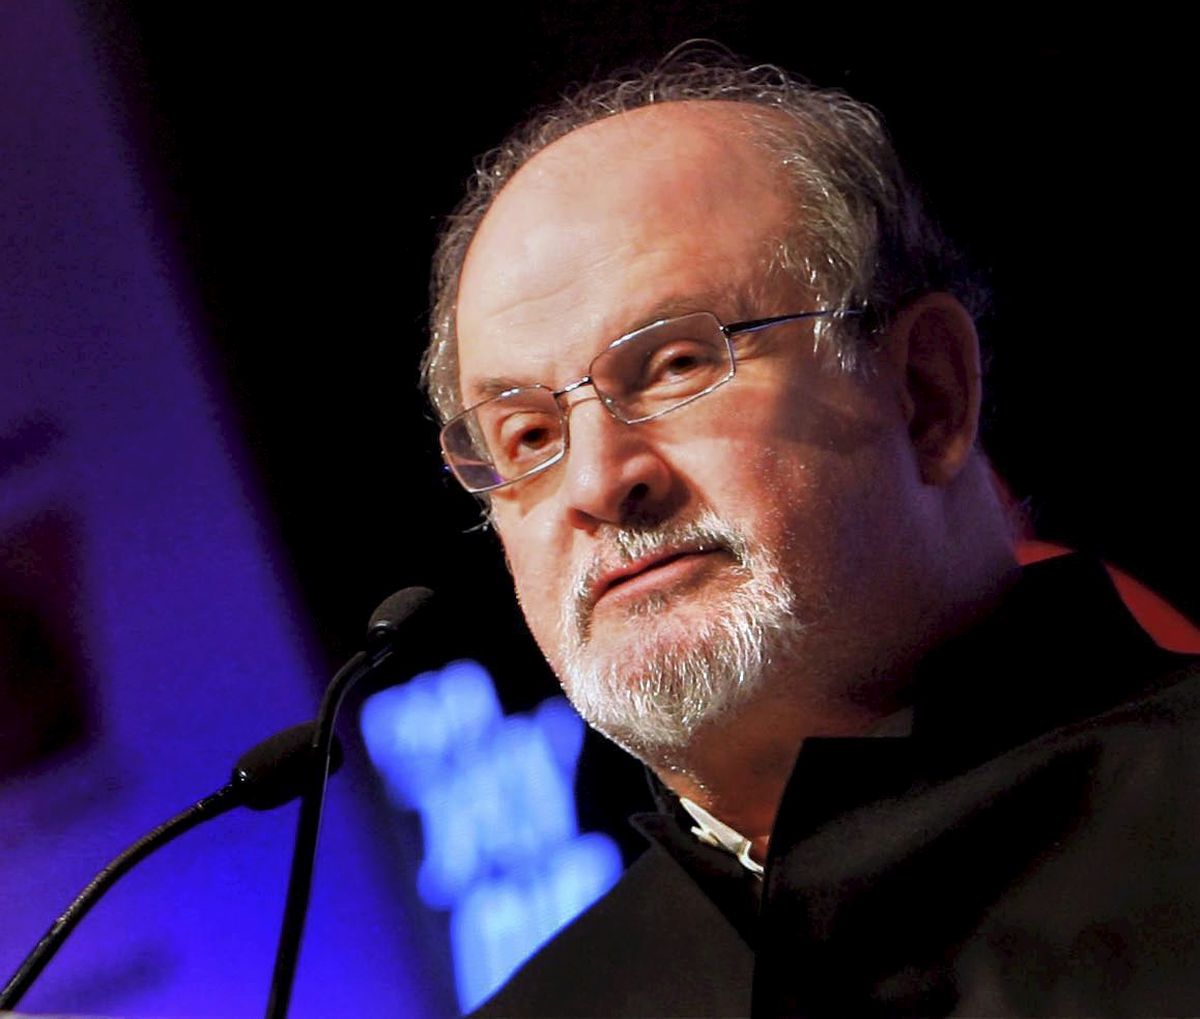 Rushdie loses use of eye, hand after knife attack